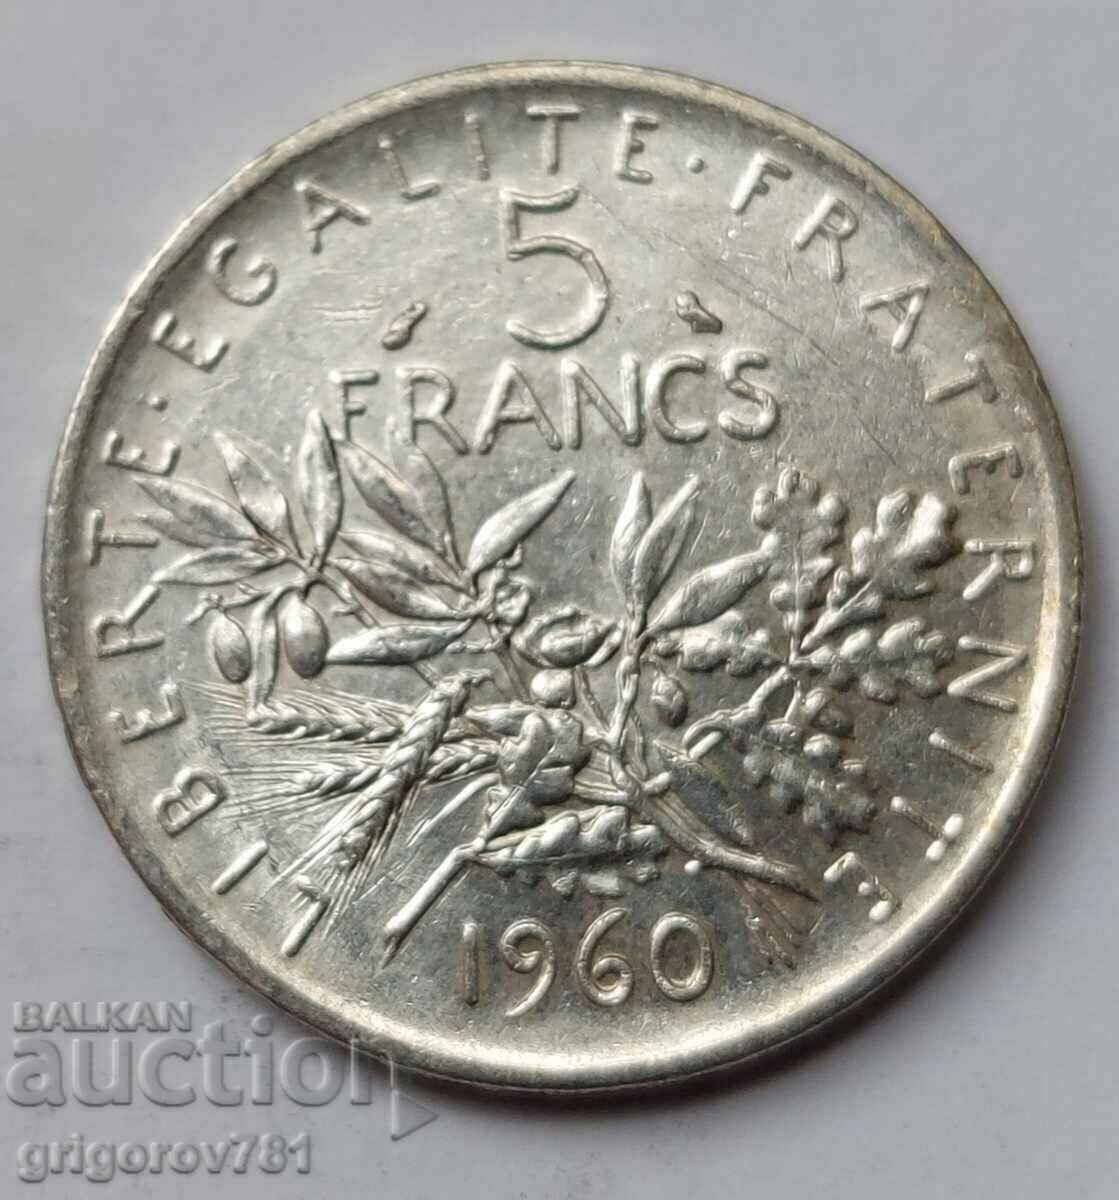 5 Francs Silver France 1960 - Silver Coin #8